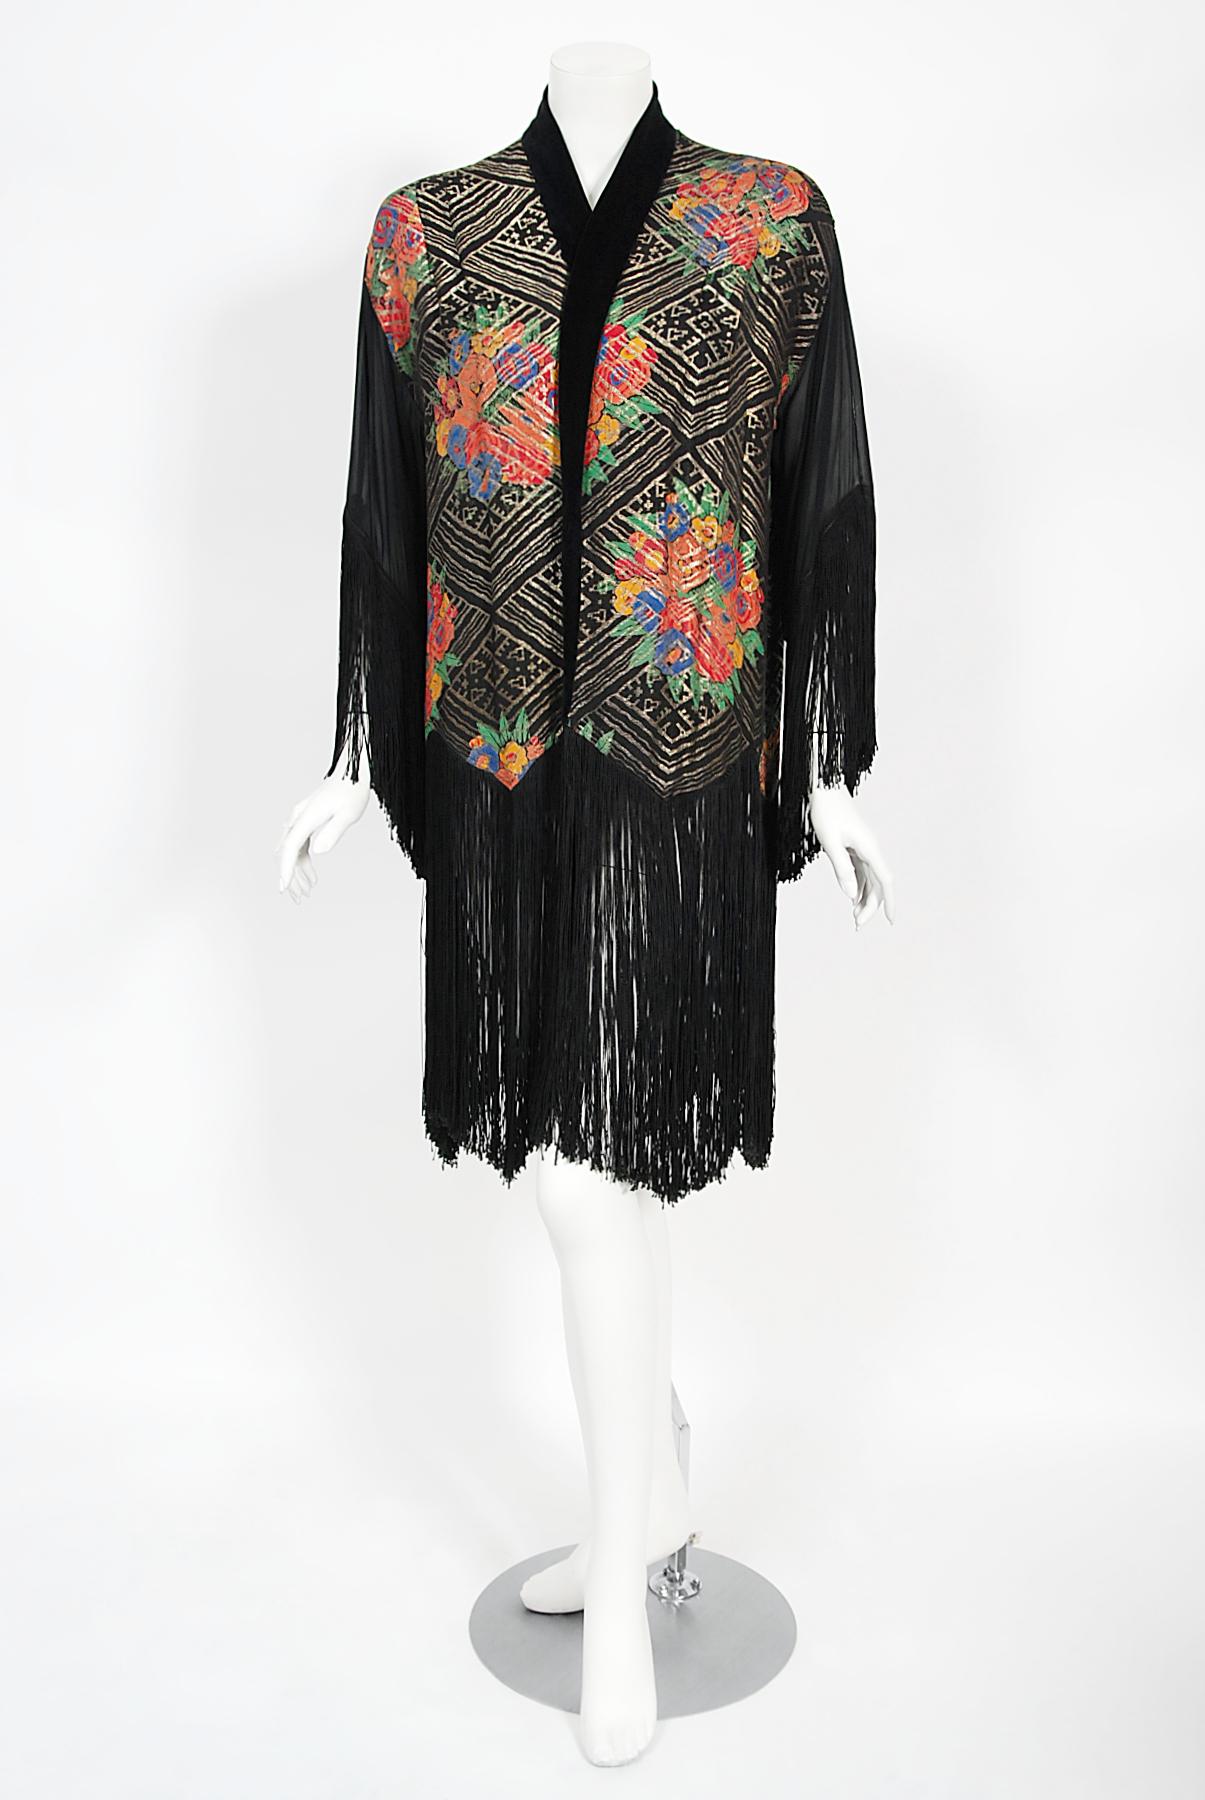 An exceptional French sparkling silk lamé and black sheer chiffon flapper jacket dating back to the mid 1920's. It is easy to find fringed shawls, but this is an actual art deco jacket made of the finest luxury textures. The fabrics combinate